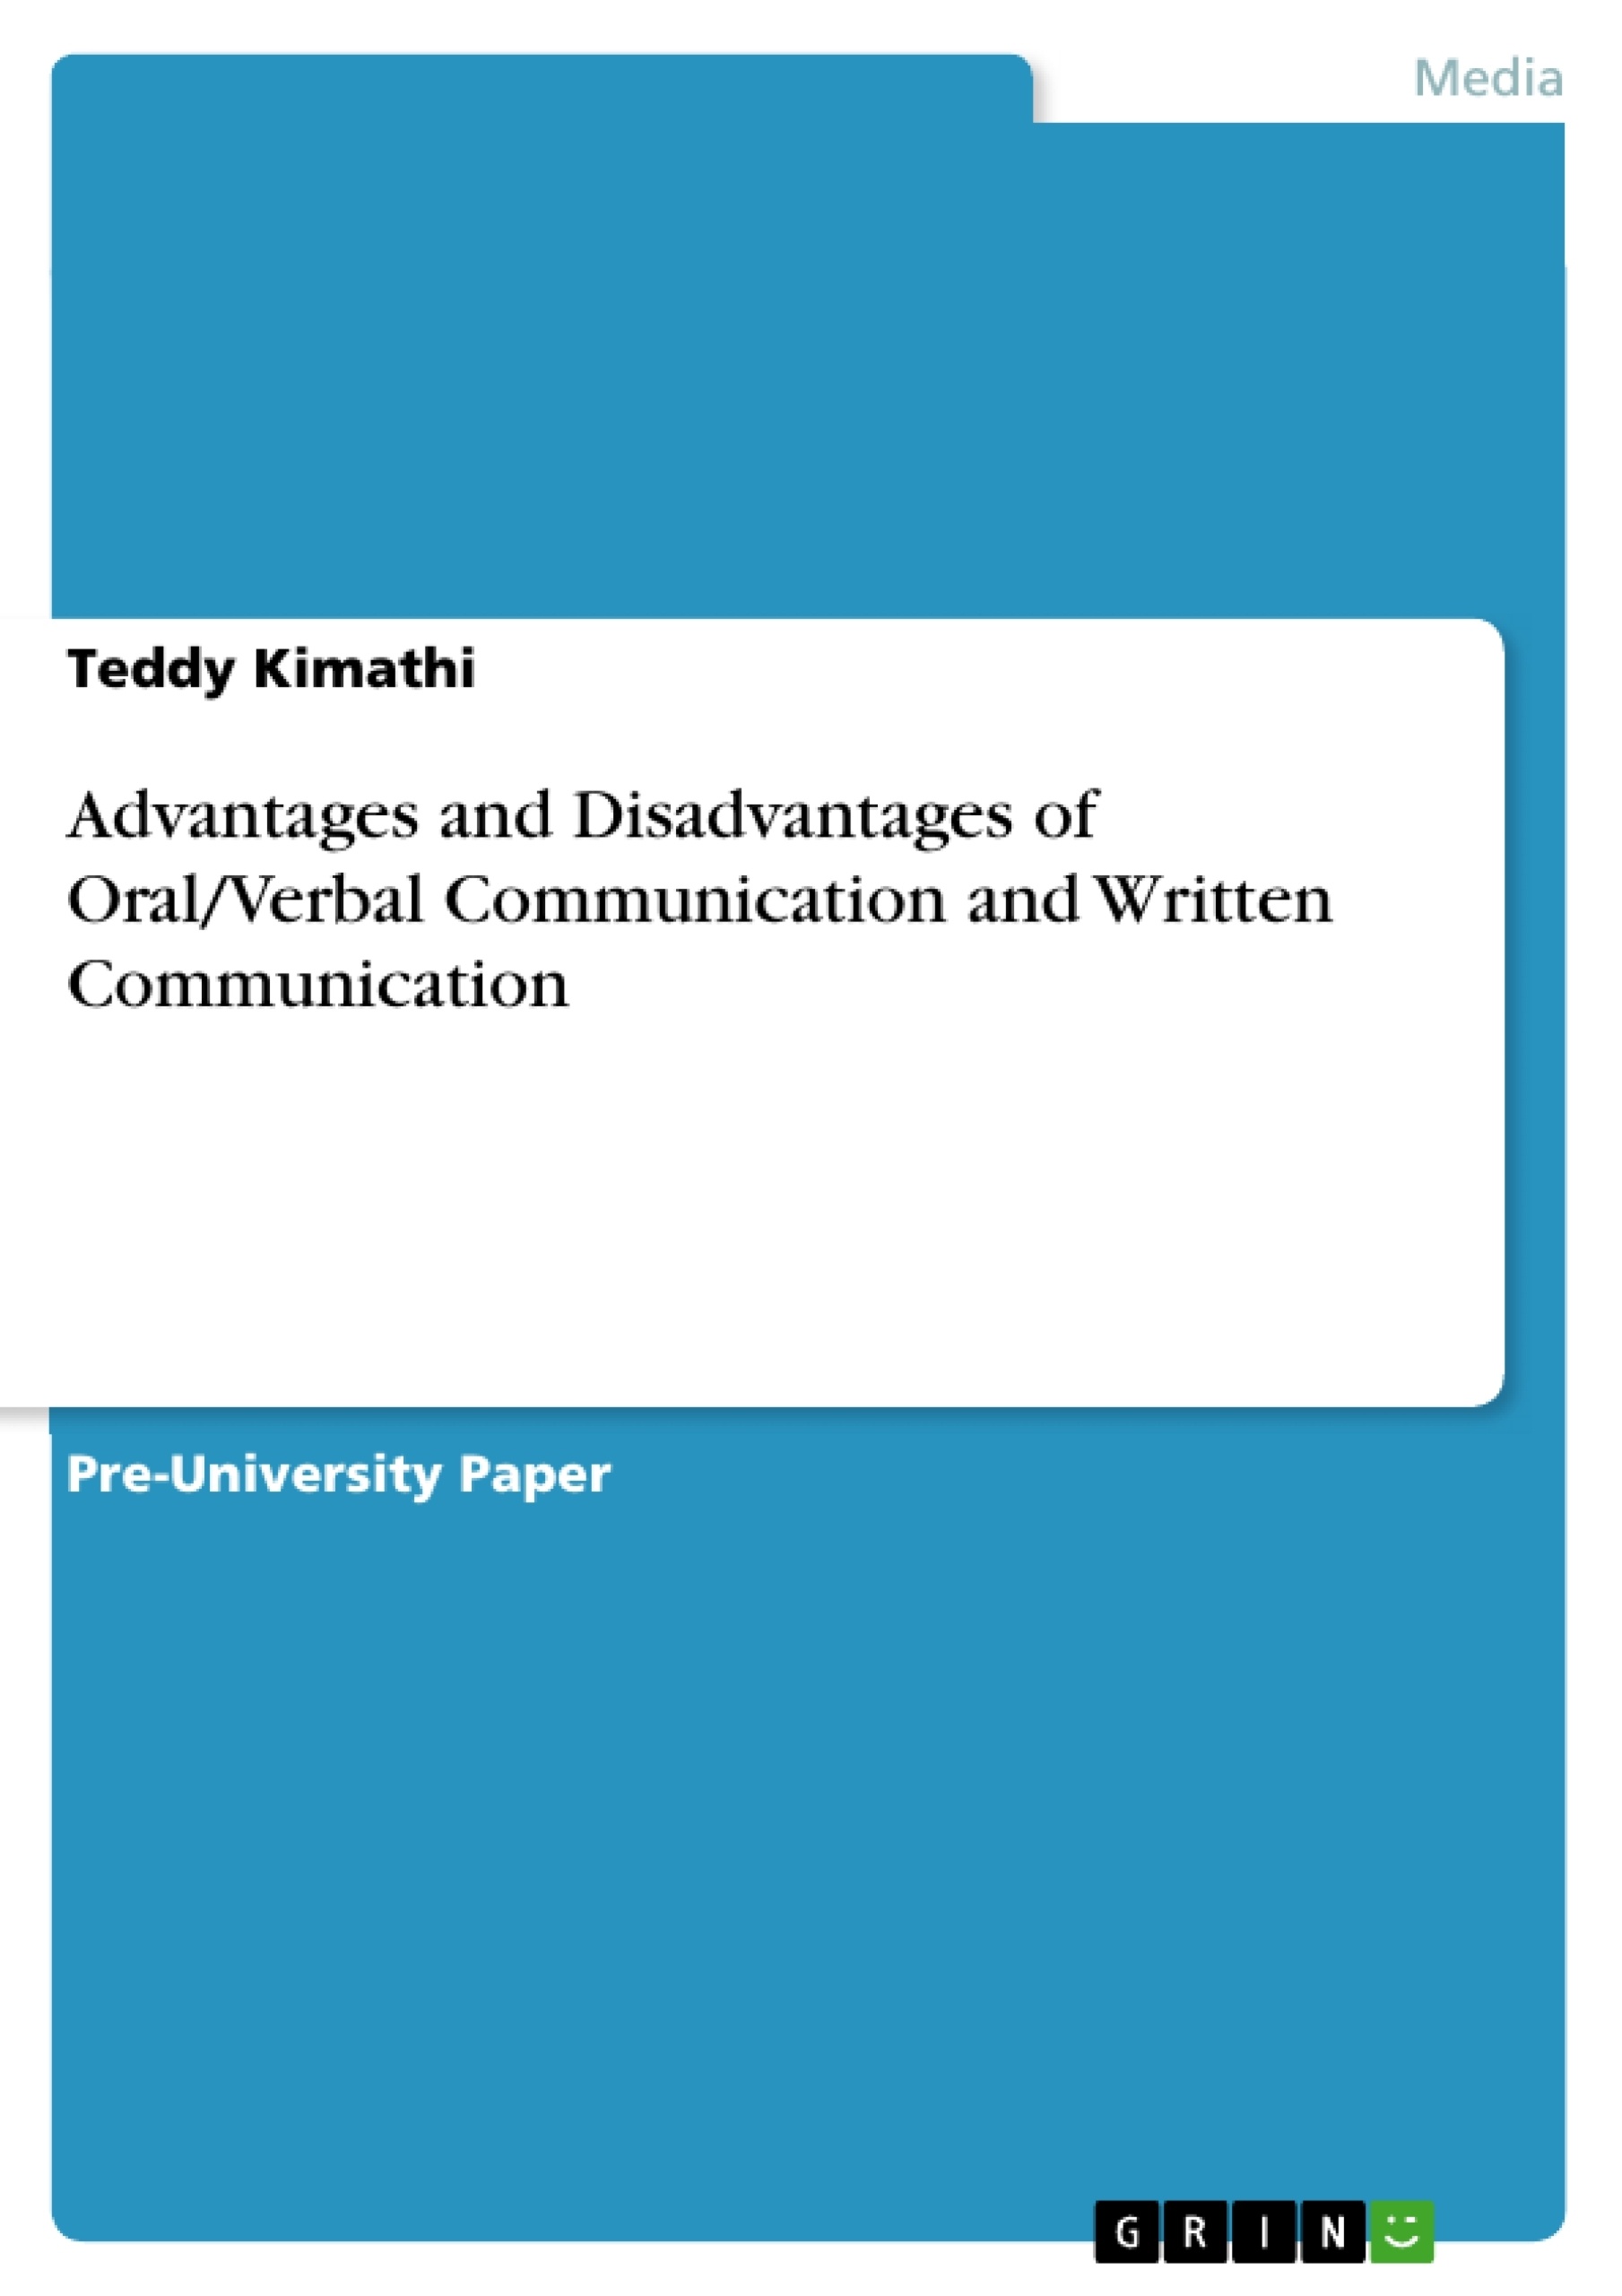 Free research papers on communication